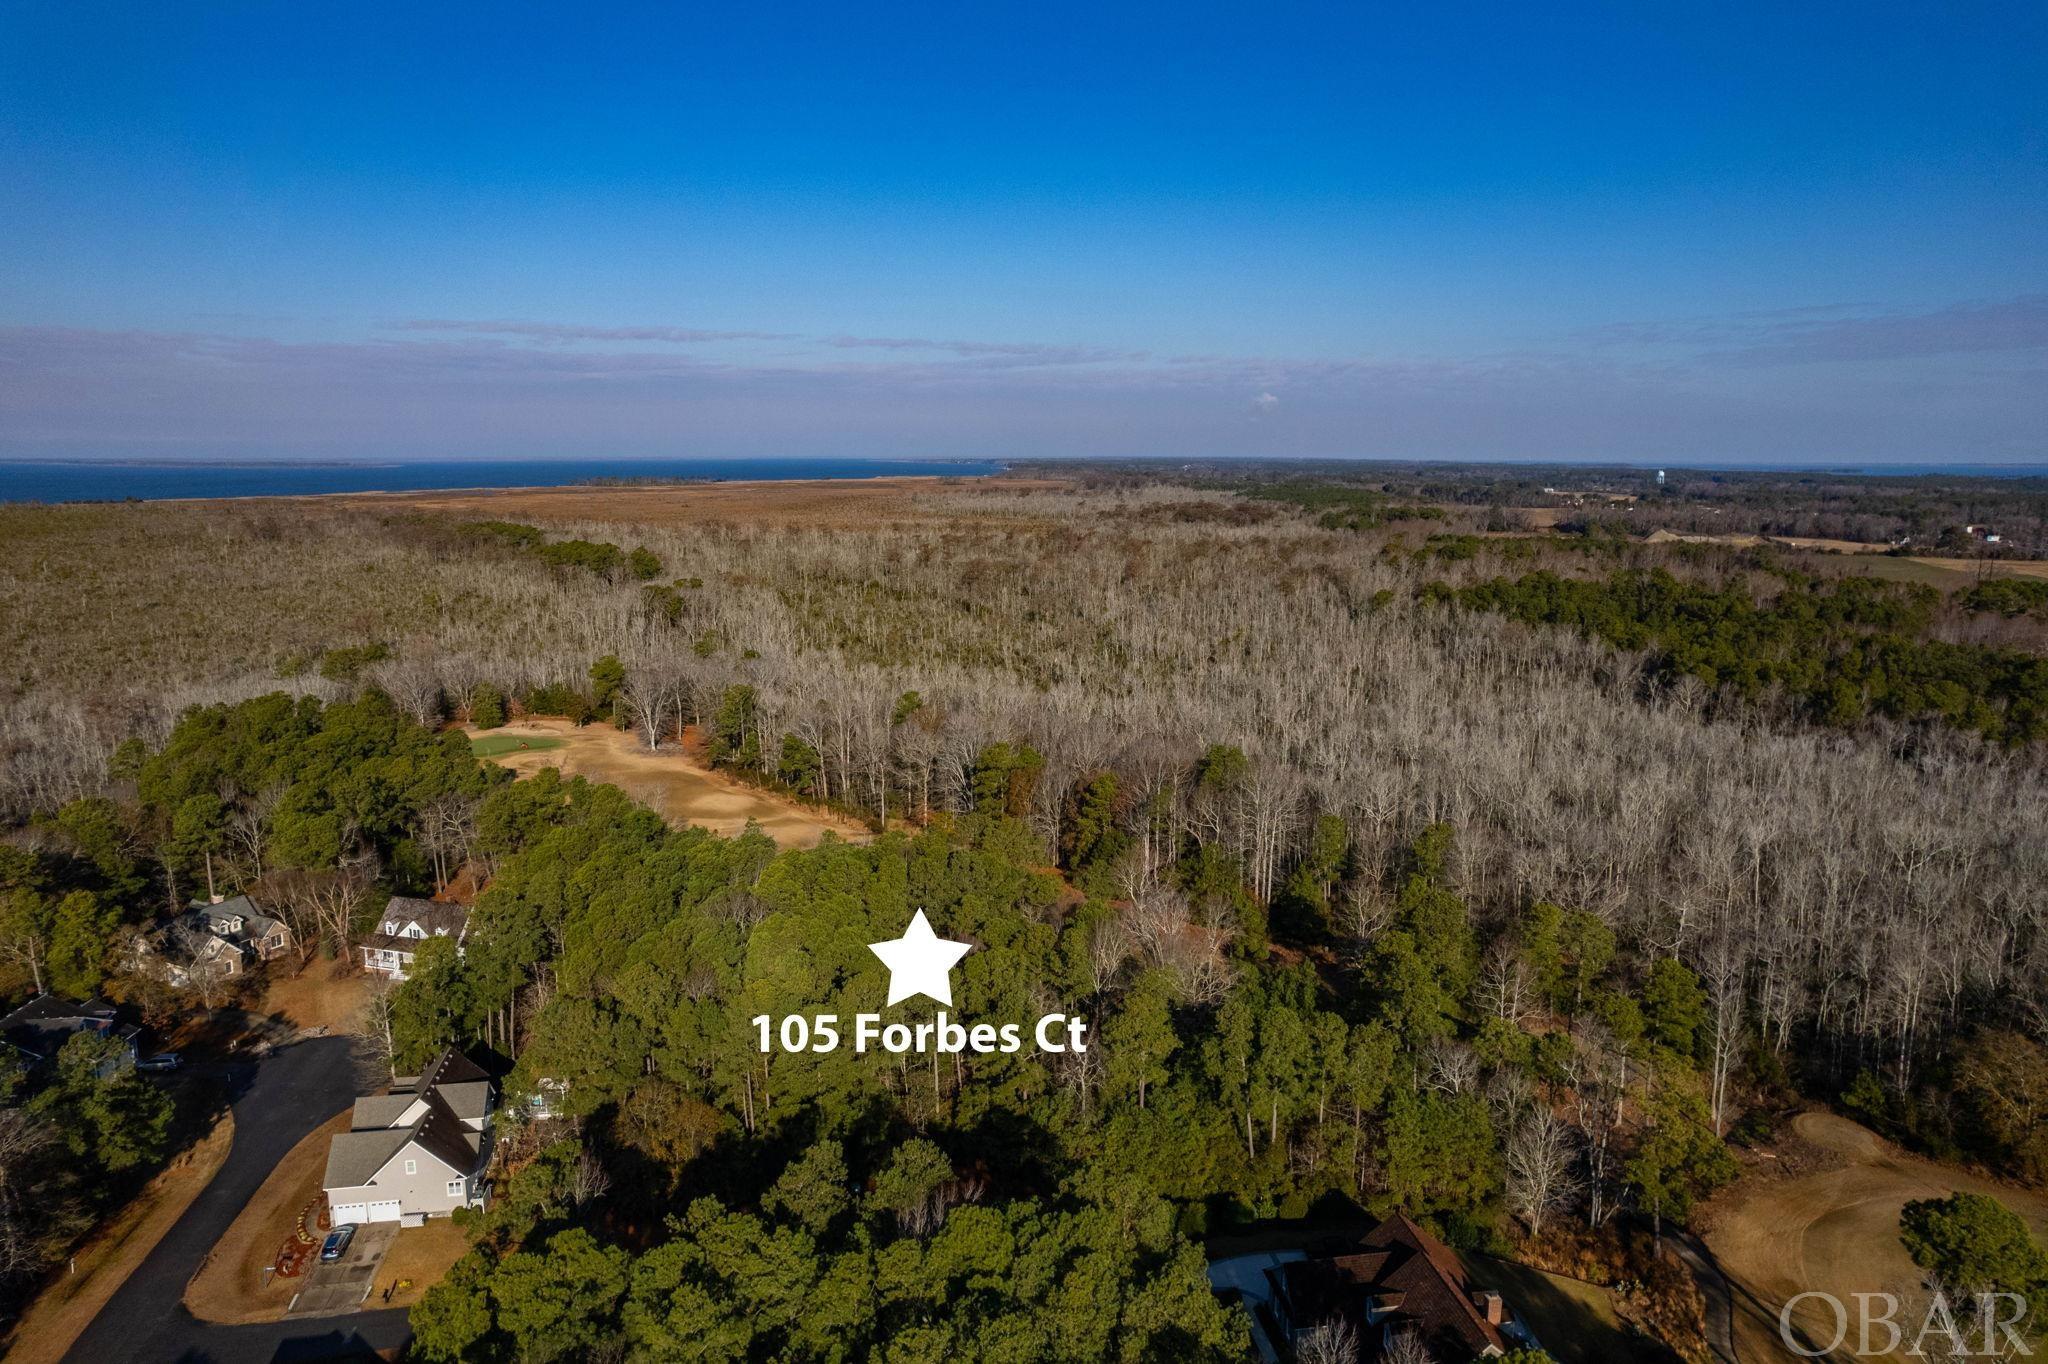 105 Forbes Court, Powells Point, NC 27966, ,Lots/land,For sale,Forbes Court,124287